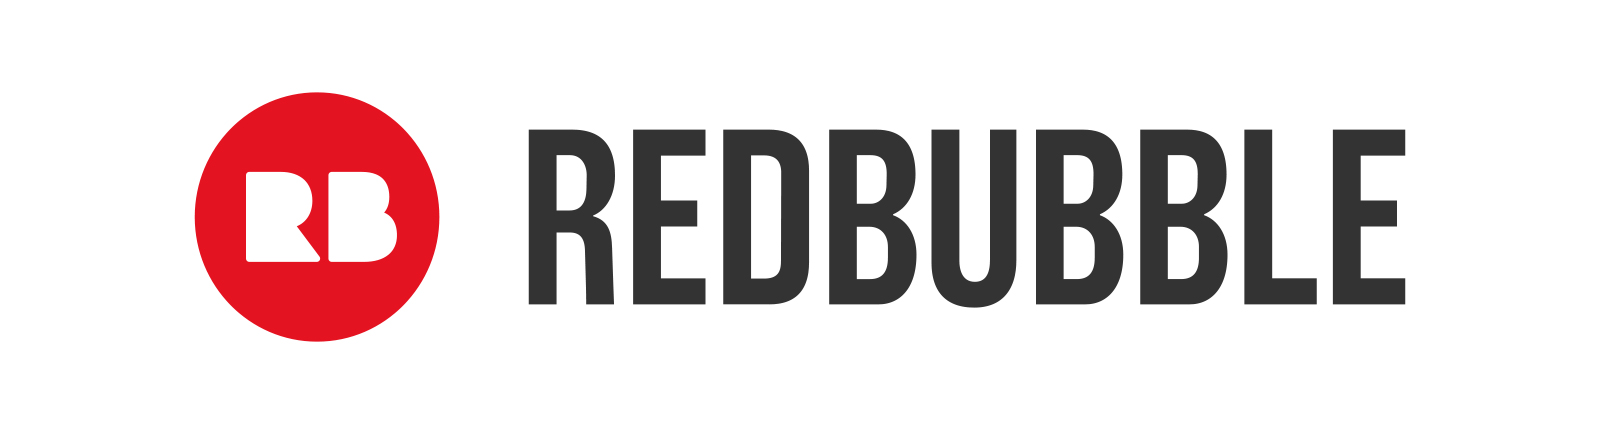 Redbubble featured image logo